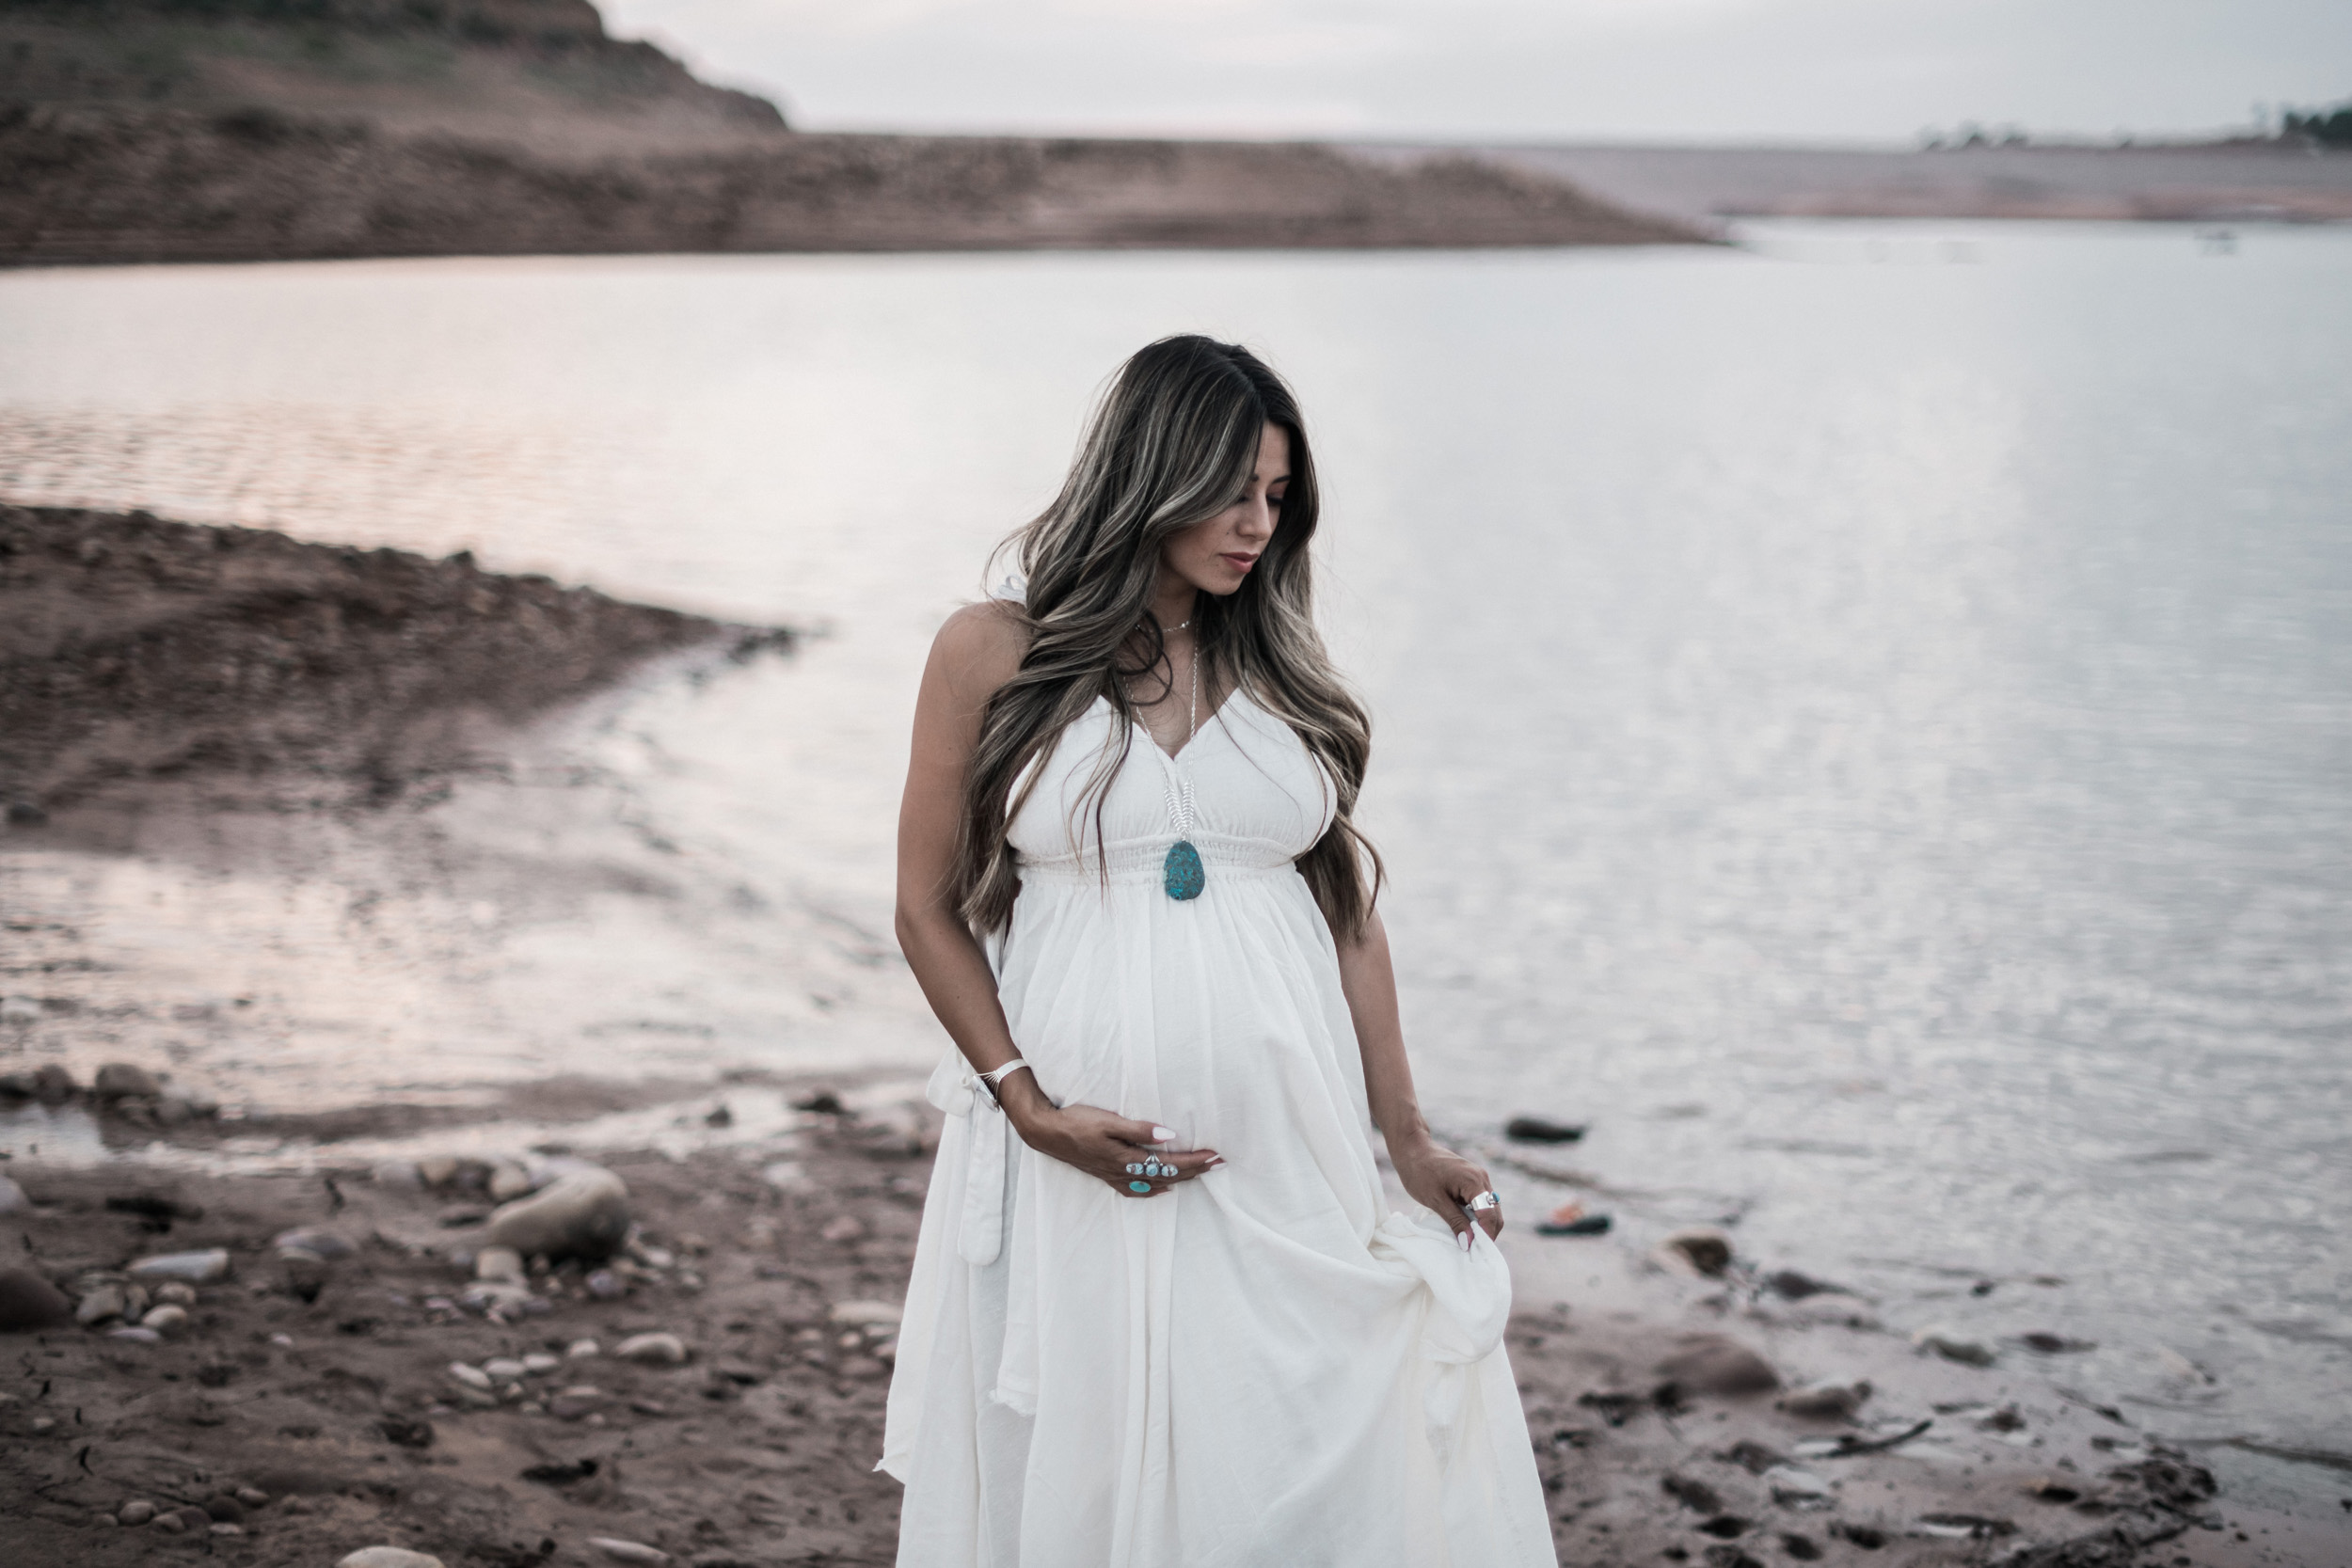 Pregnant woman on beach at lake turquoise necklace